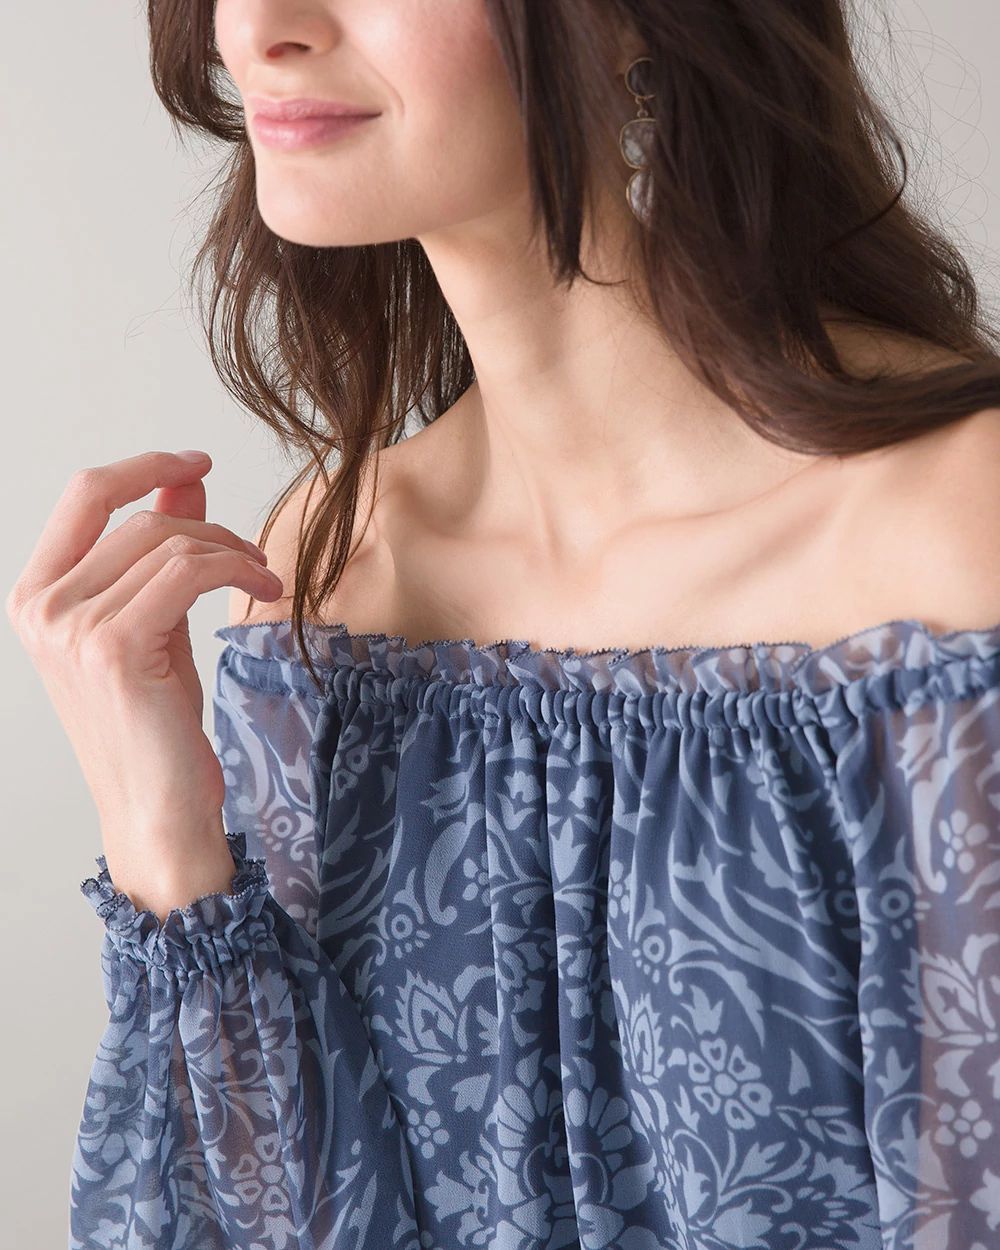 Off-the-Shoulder Ruffle Neck Blouse click to view larger image.